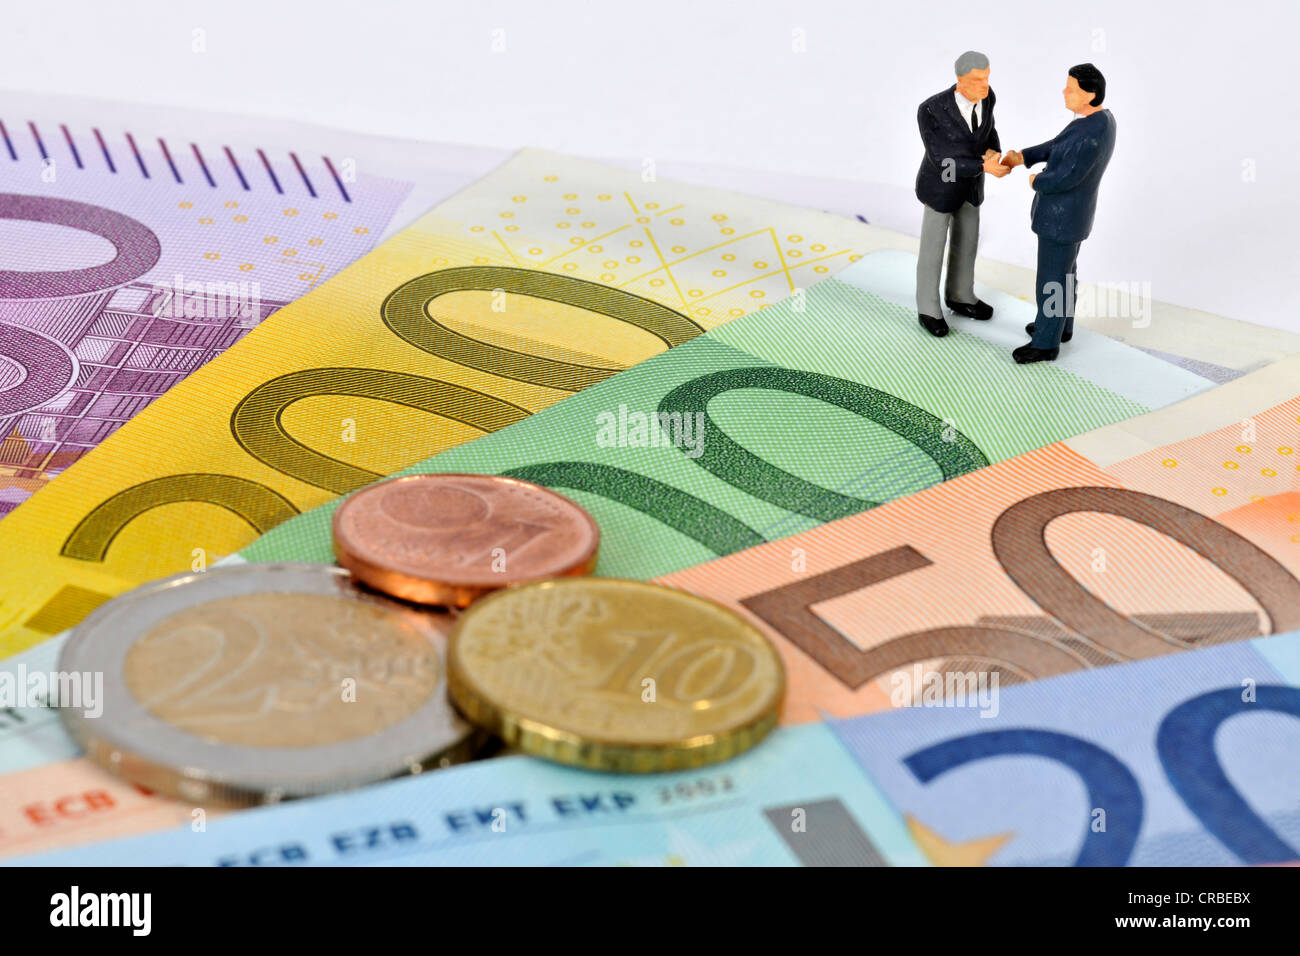 Miniature figurines of managers shaking hands while standing on euro banknotes and coins, symbolic image for business Stock Photo